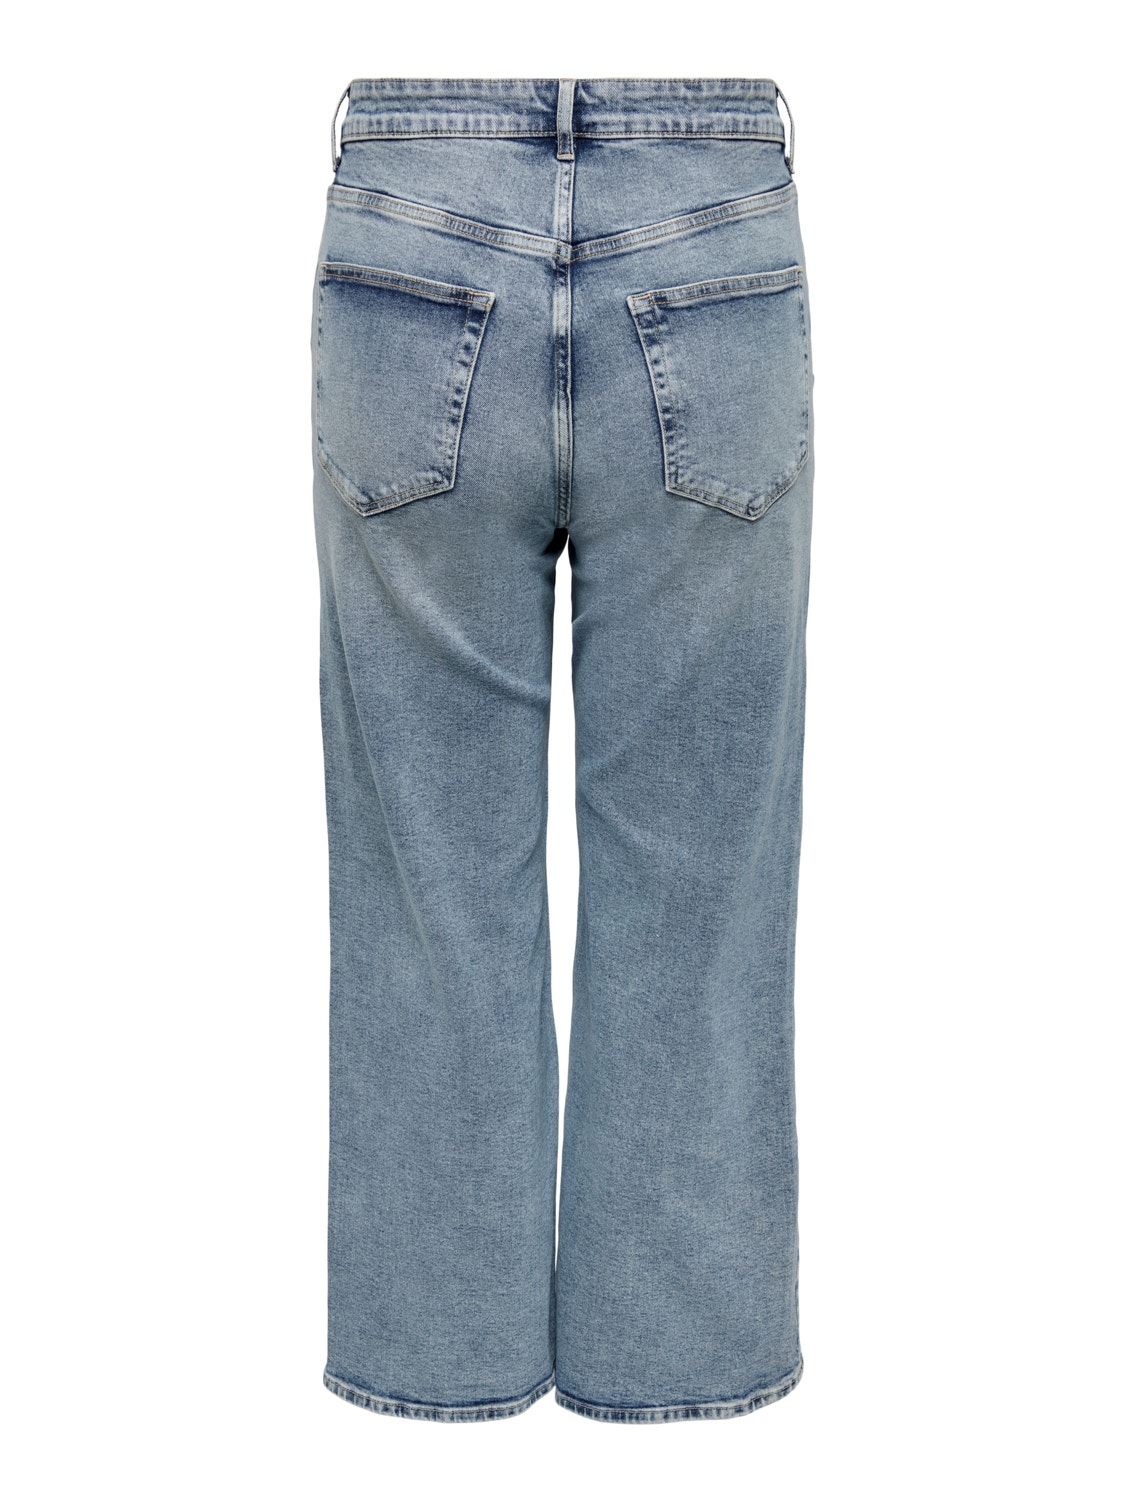 ONLY Skinny Fit Hohe Taille Jeans -Light Blue Denim - 15253611